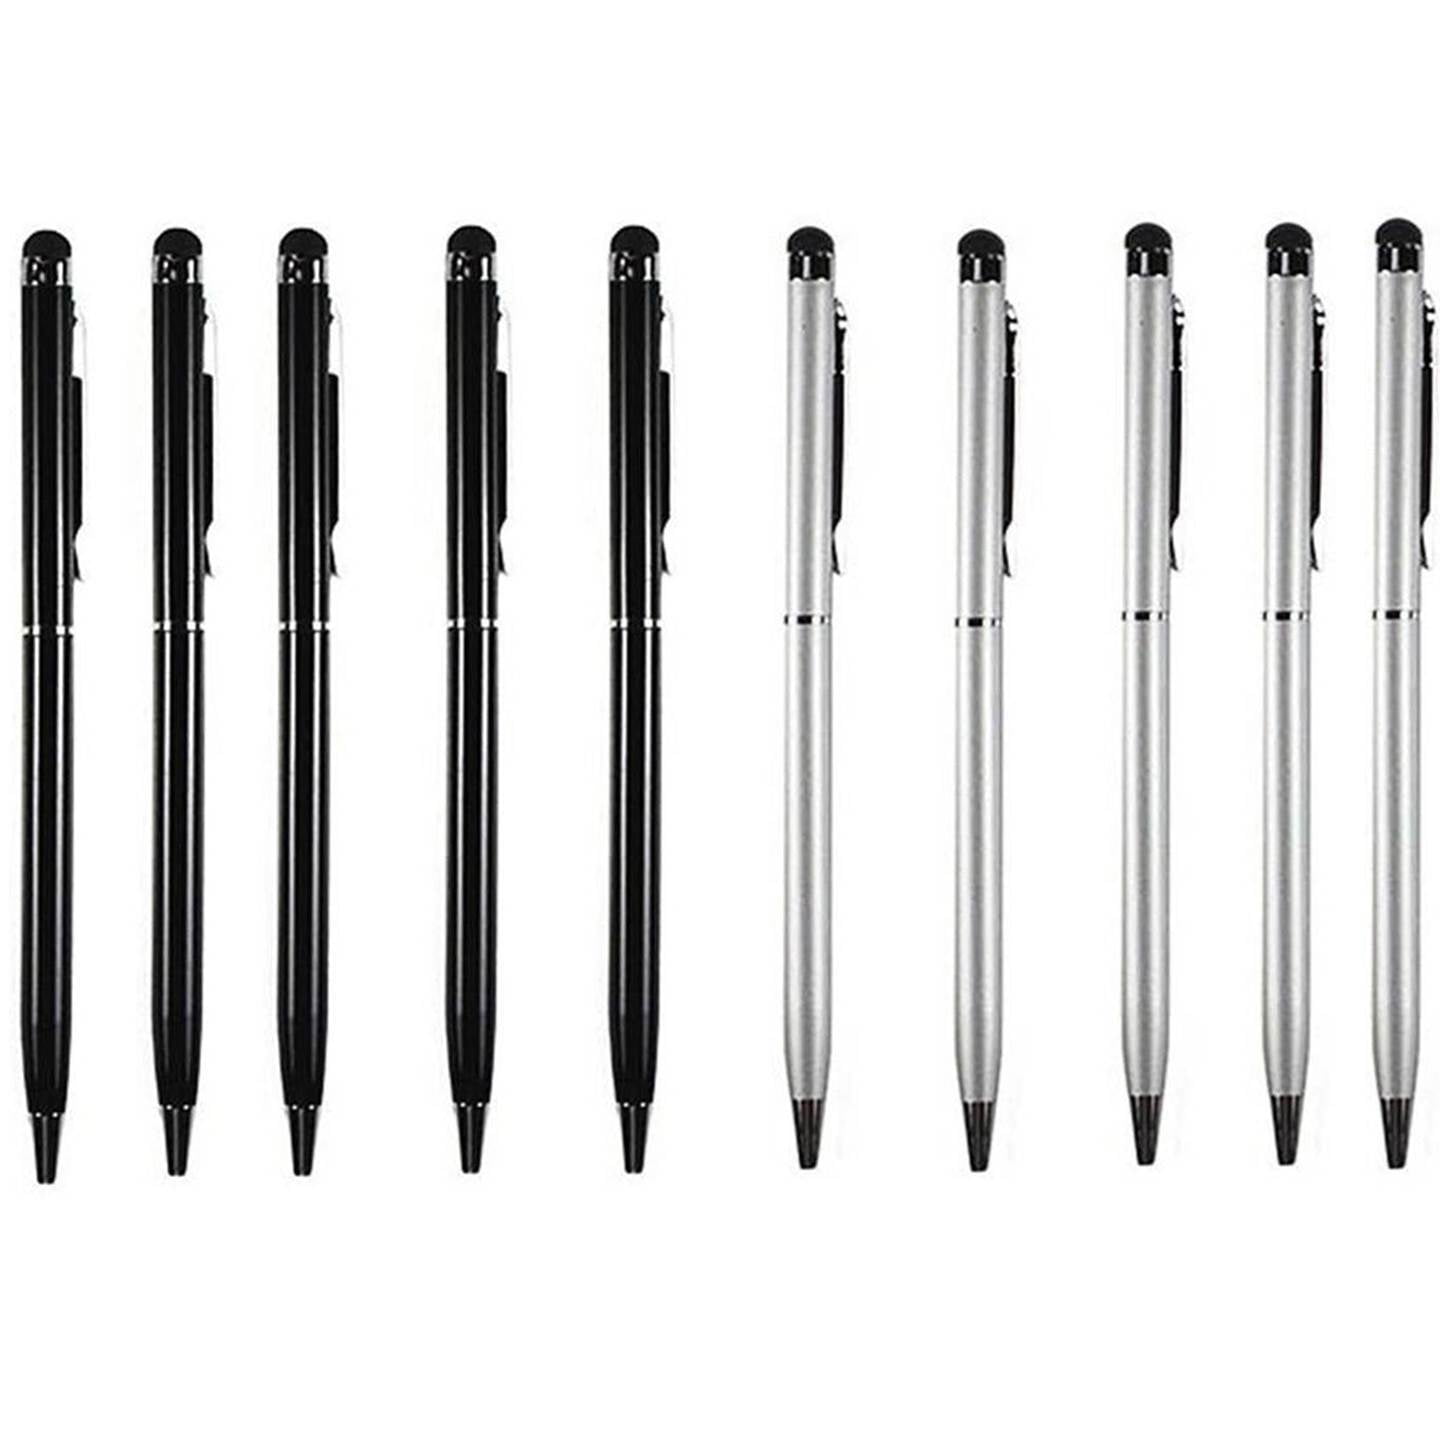 10x 2-in-1 Stylus Ballpoint Ink Touch Screen Pen for iPhone iPod 5S 6 Smartphone 